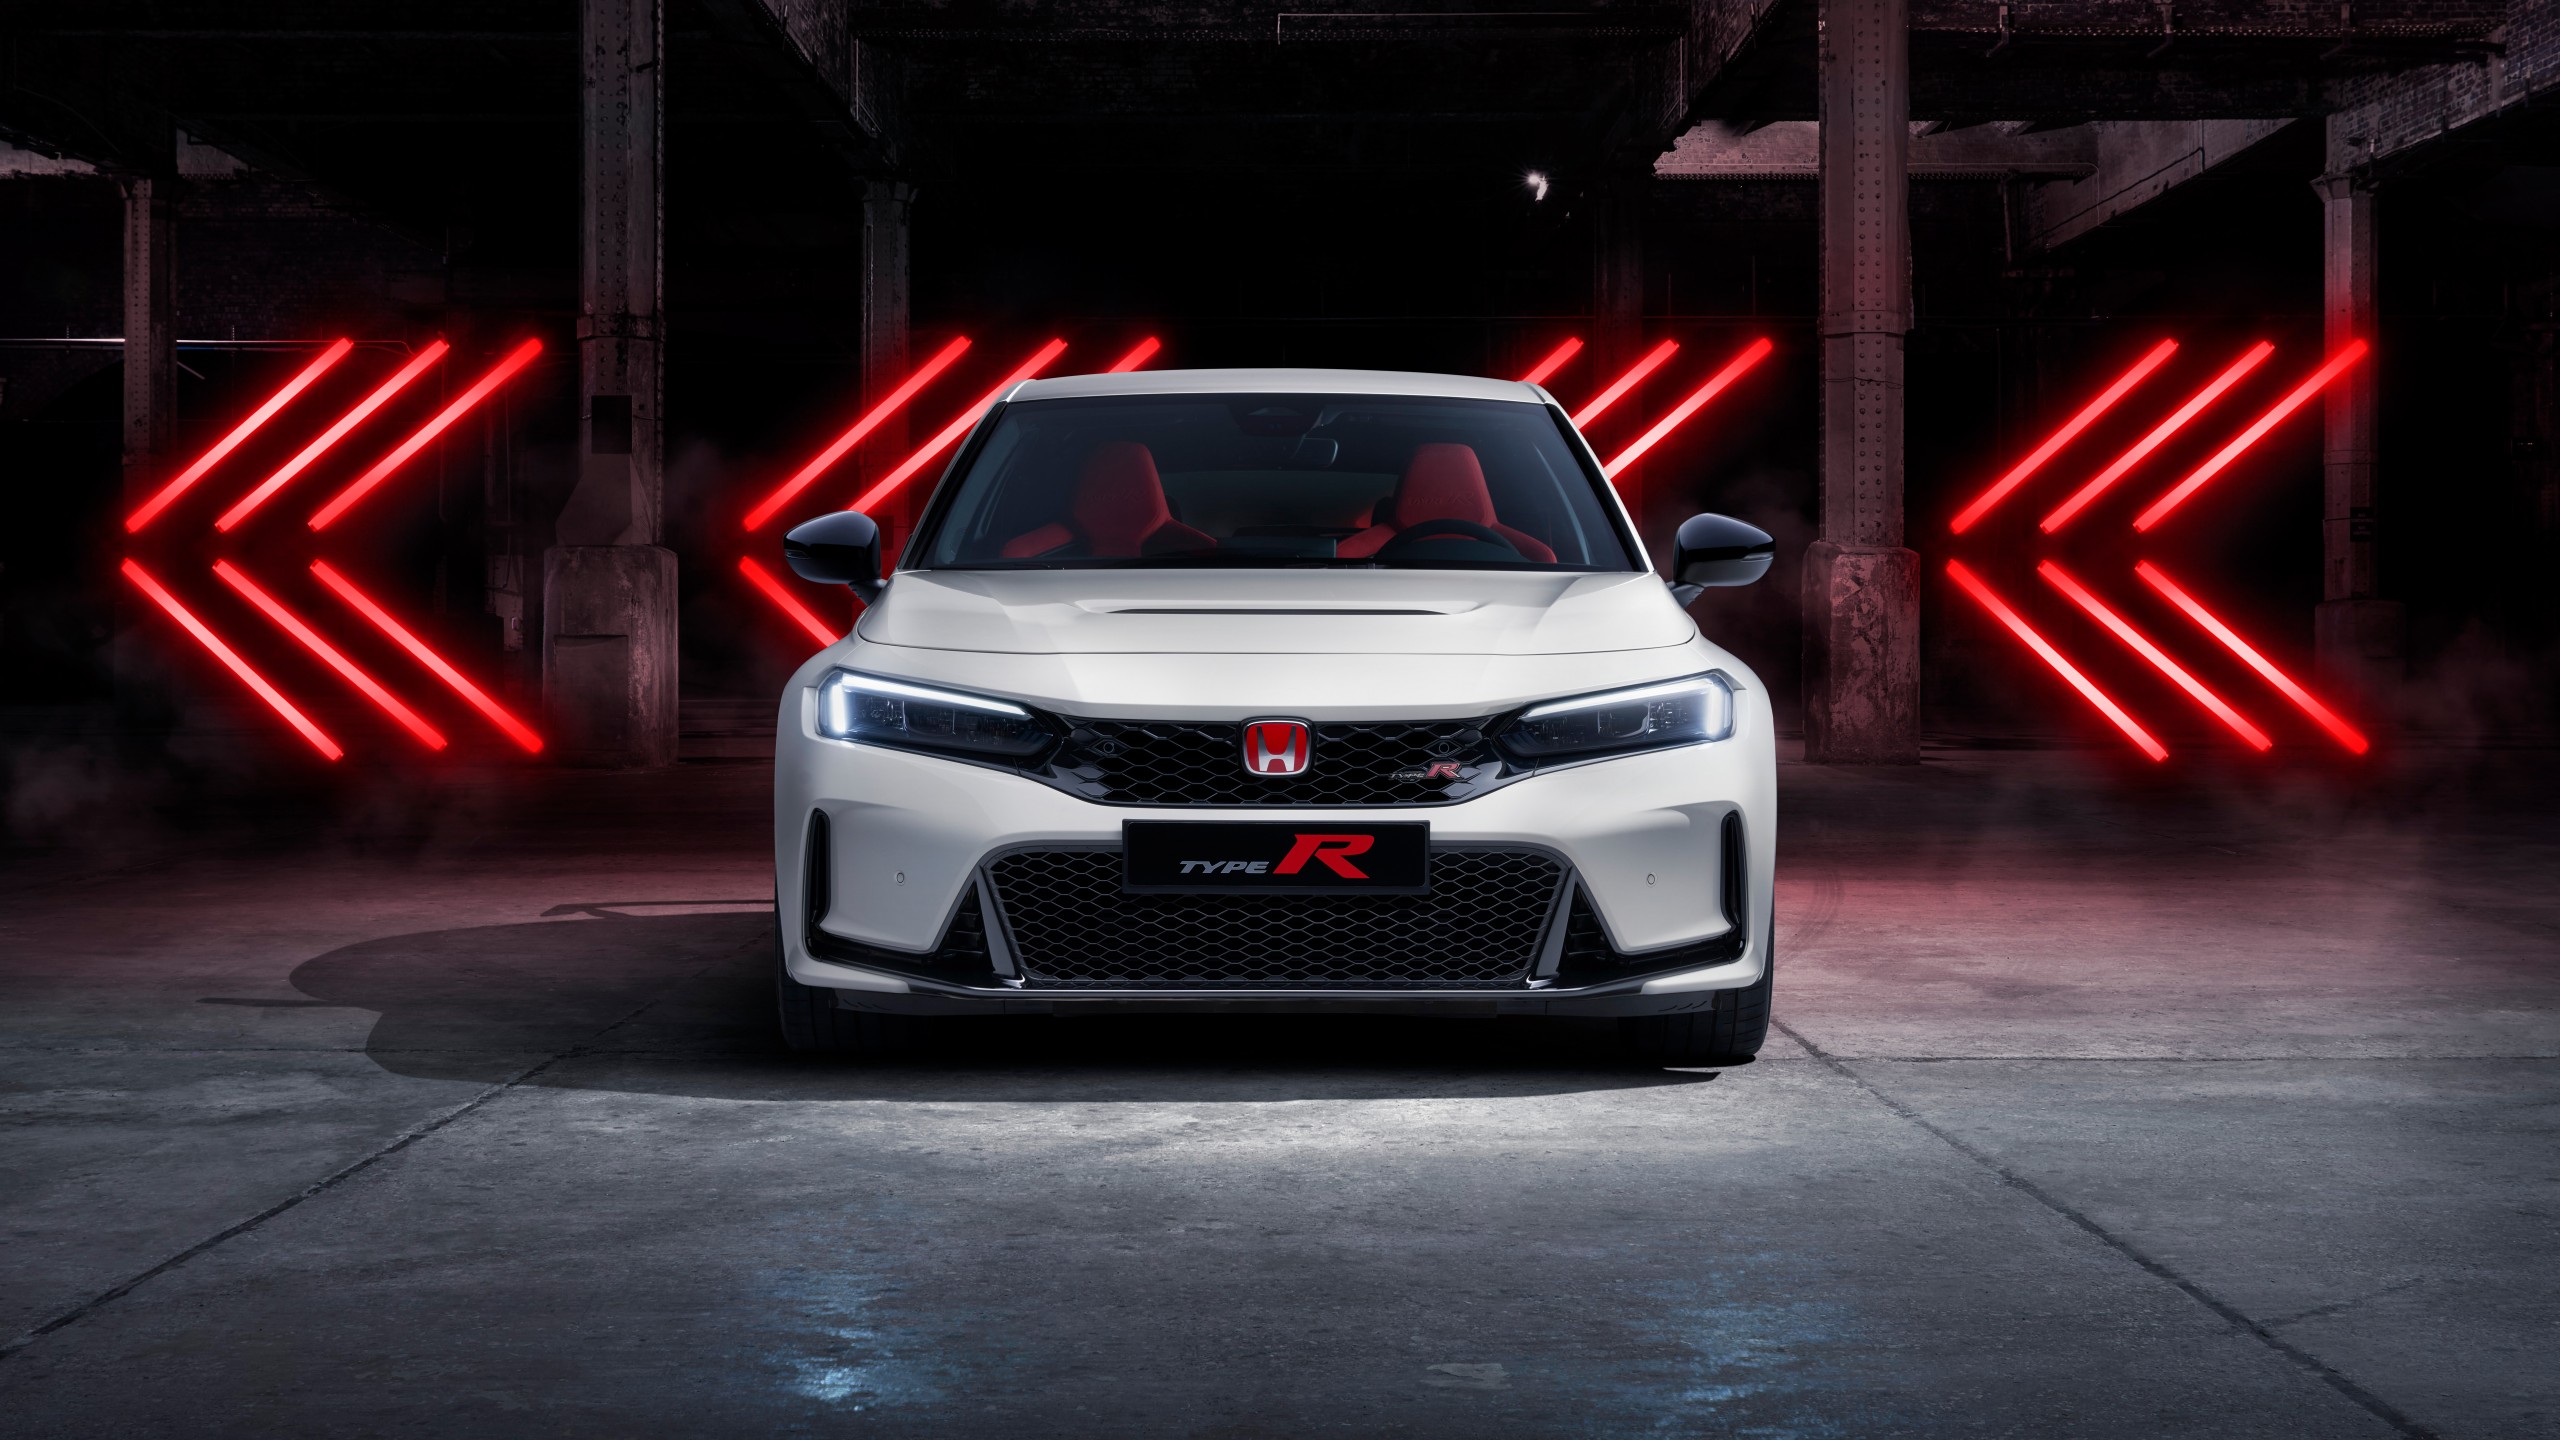 Honda Civic Type R Pickup Truck Concept 2018 Cars  iPhone Wallpapers  Free Download